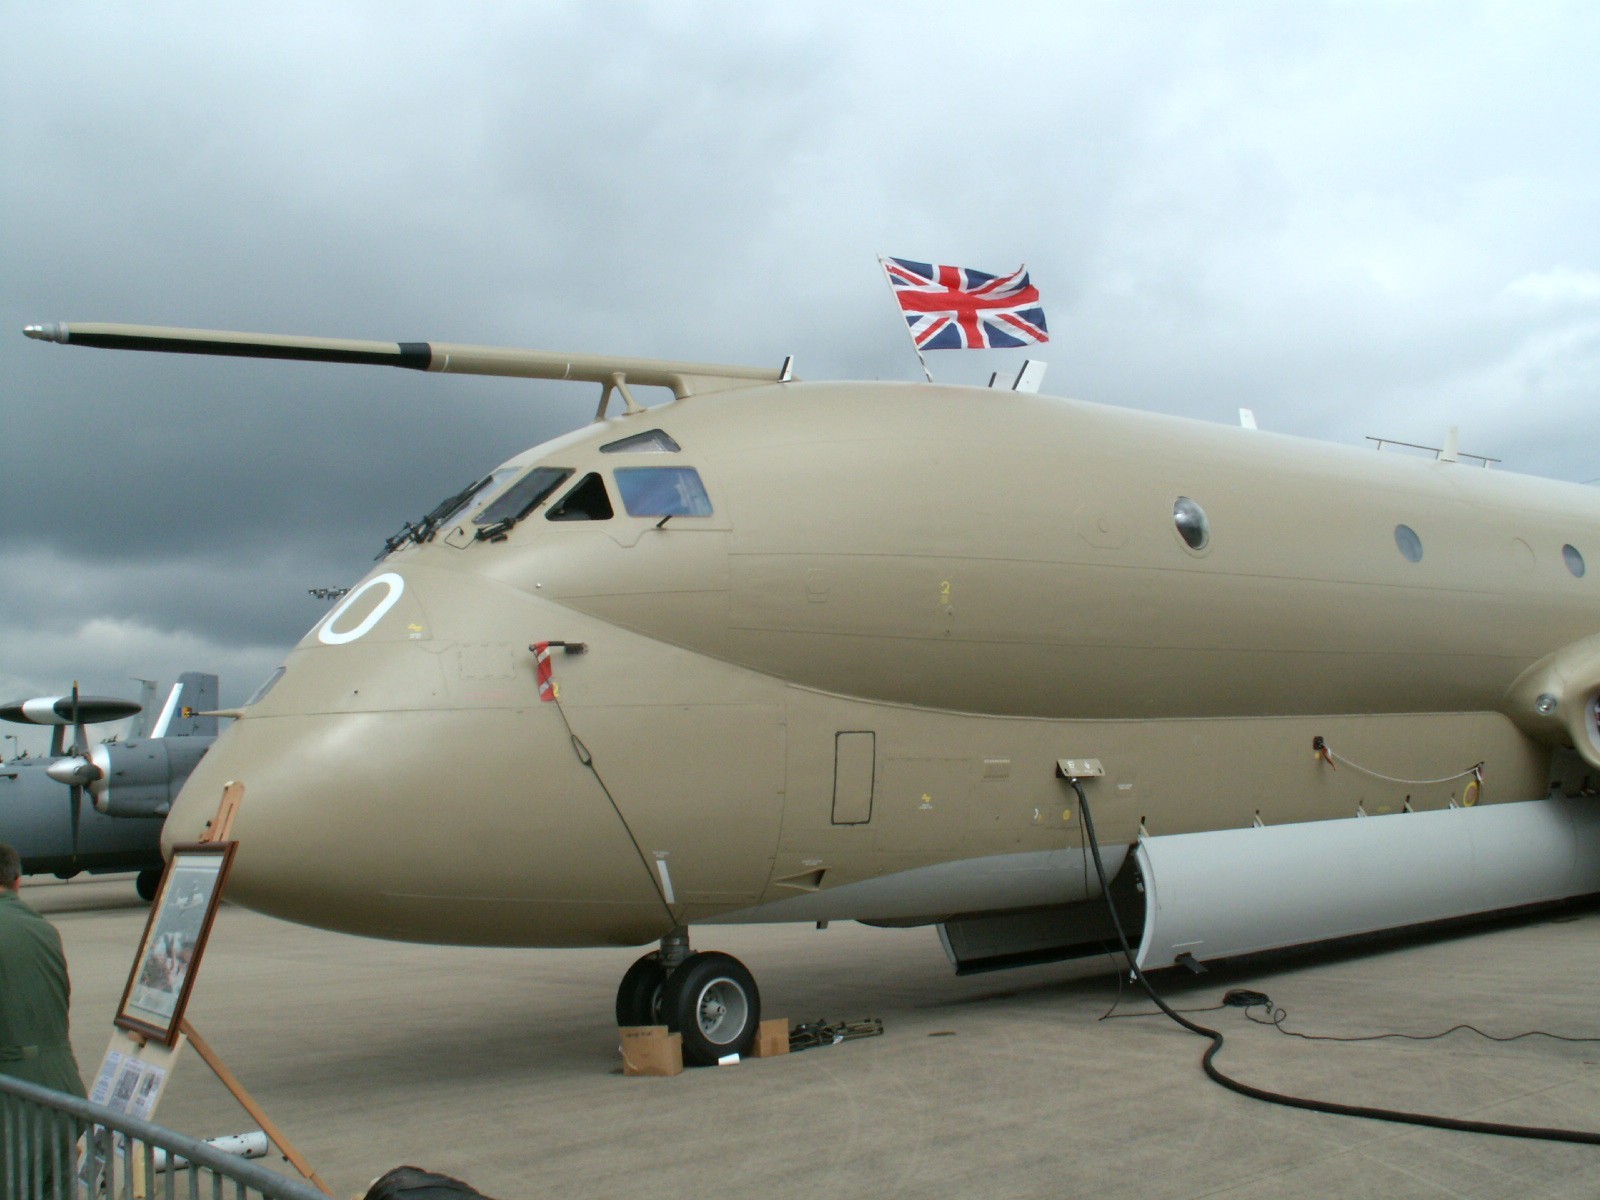 Interesting facts about the Hawker Siddeley Nimrod; The Maritime Patrol and Reconnaissance Aircraft